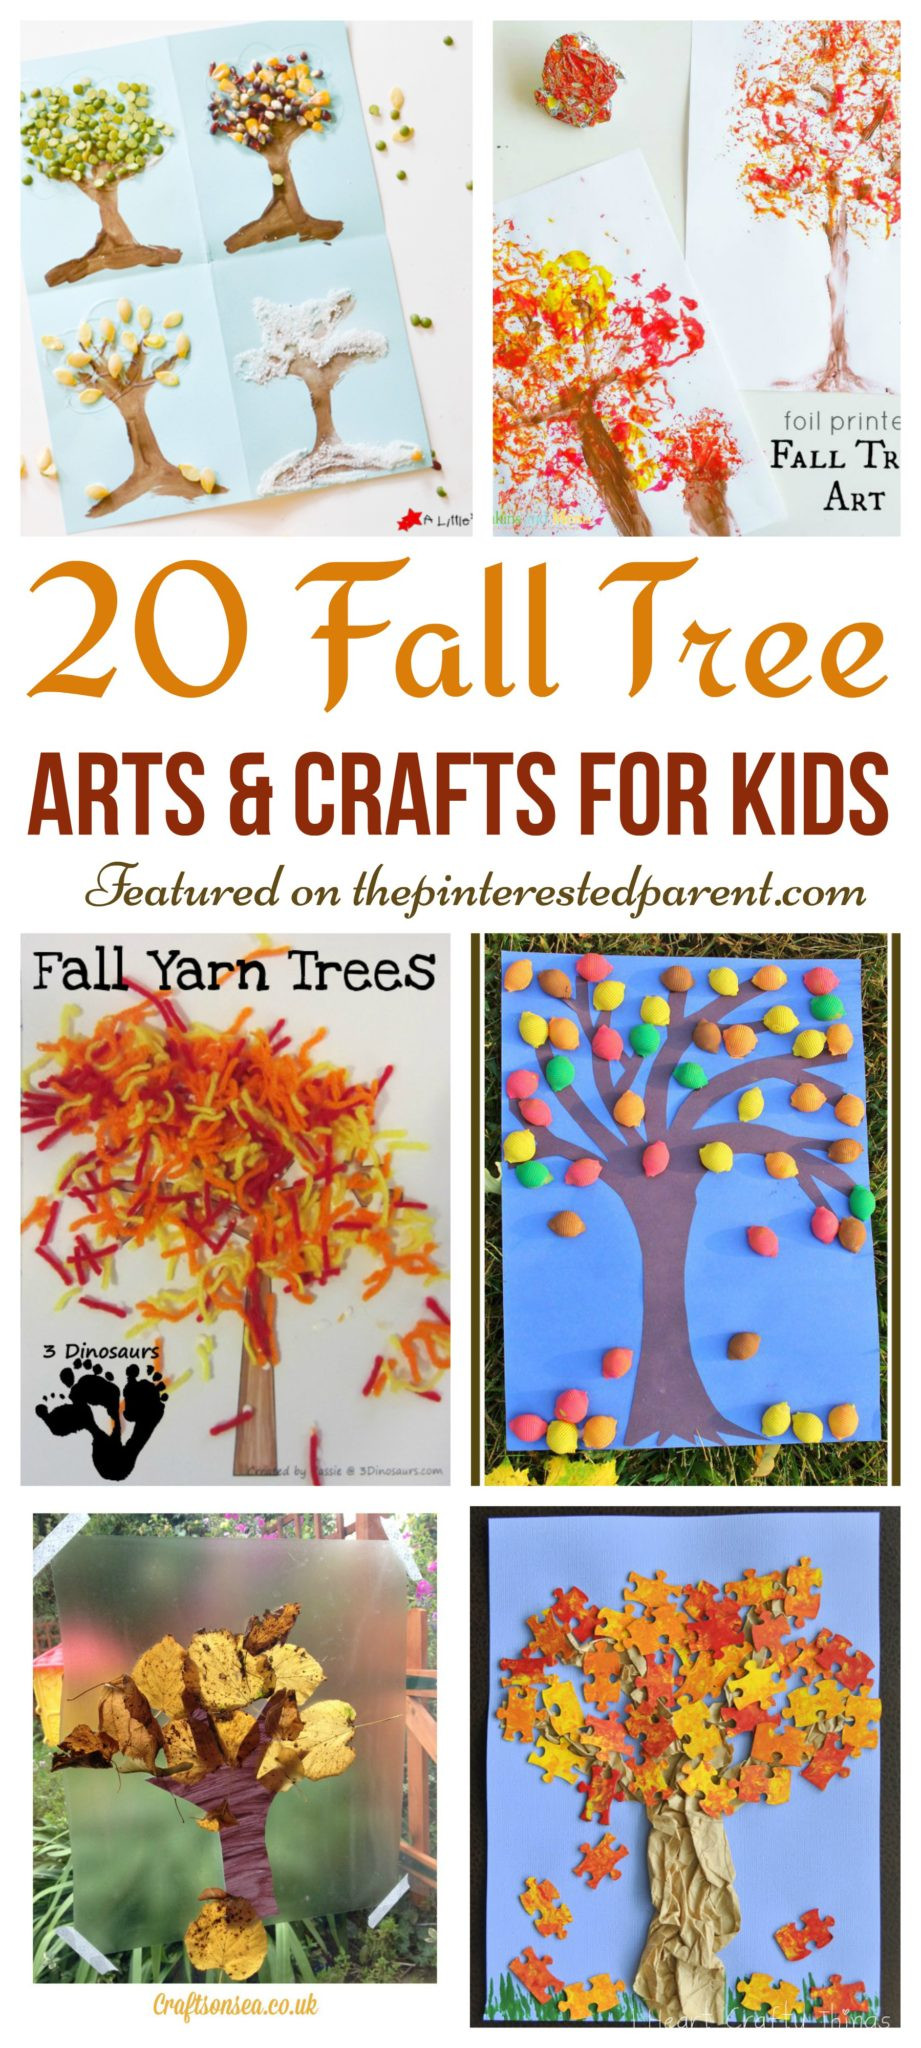 Arts Crafts For Preschoolers
 20 Fall Tree Arts & Crafts Ideas For Kids – The